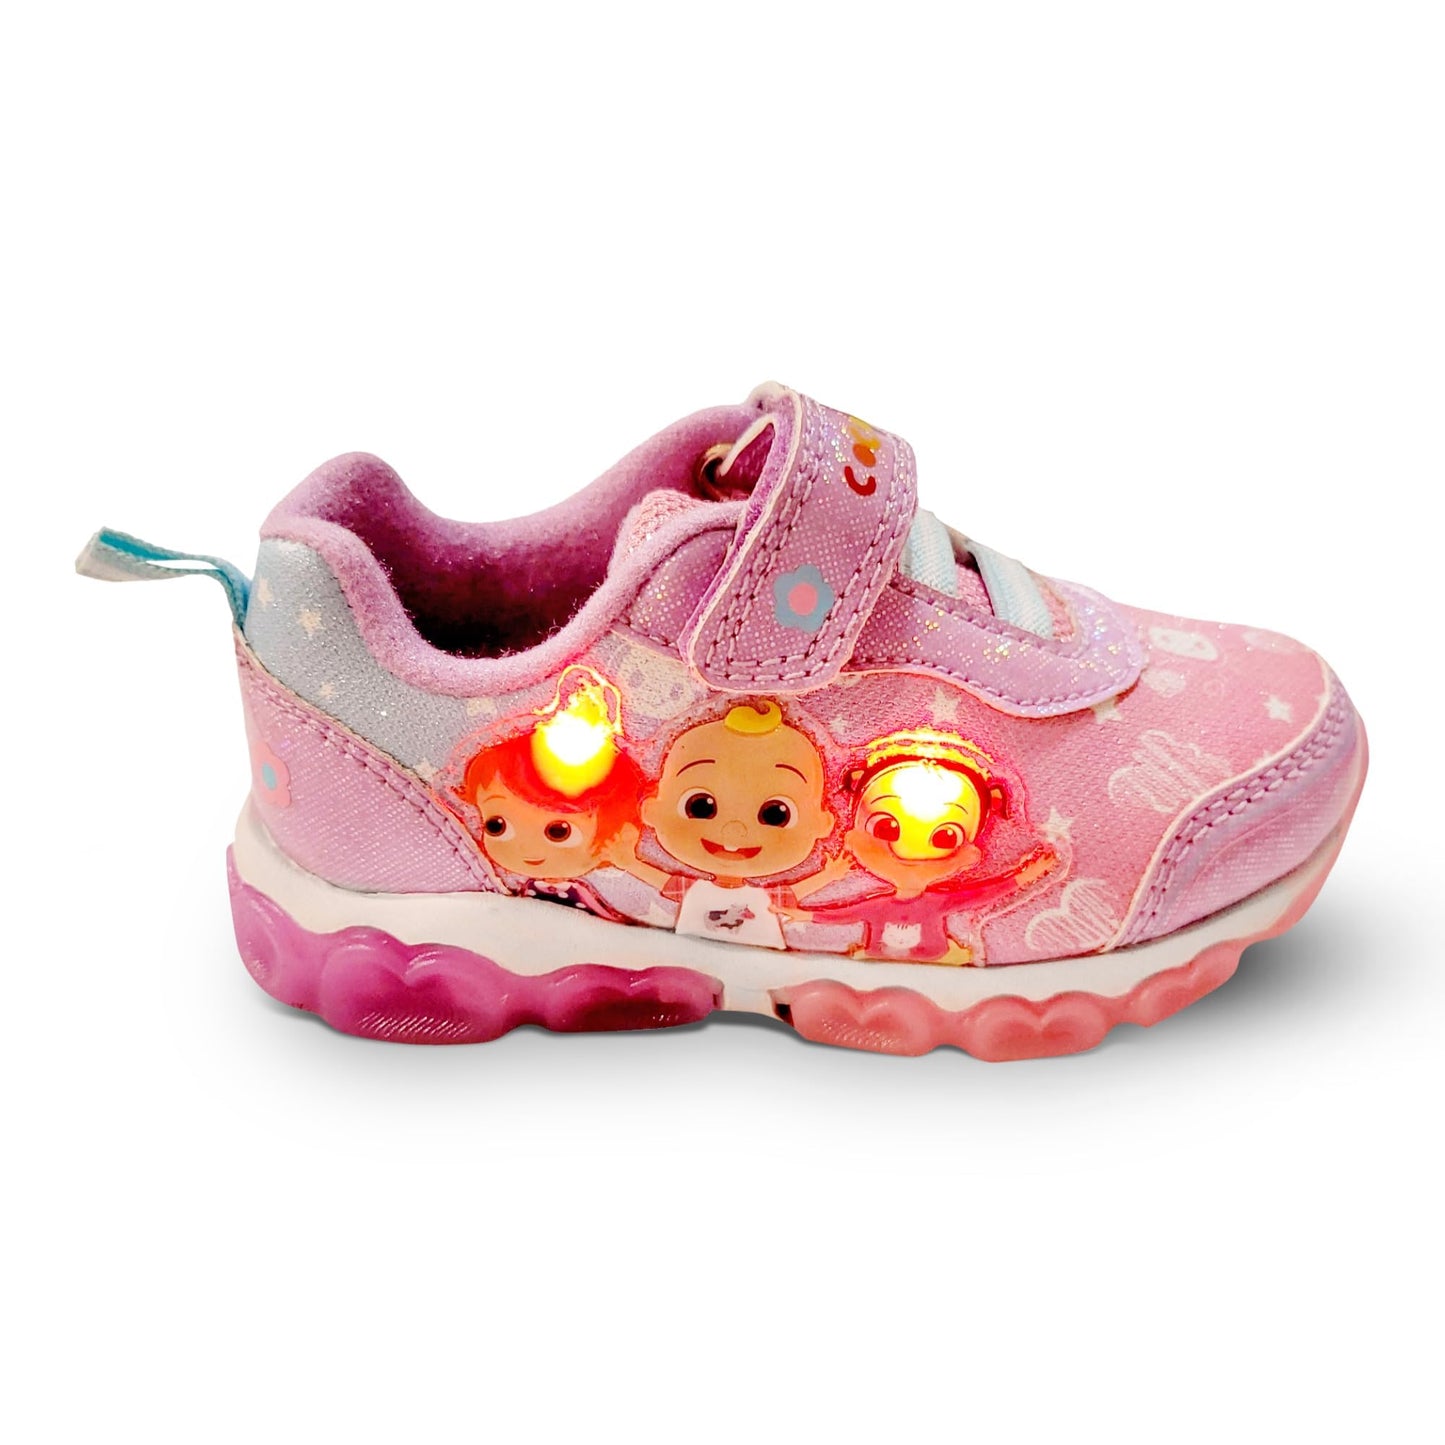 Bazillion Dreams Cocomelon Girl's Lighted Athletic Sneaker Light Up Shoes Children W/Adjustable Strap (Toddler), Pink/Purple